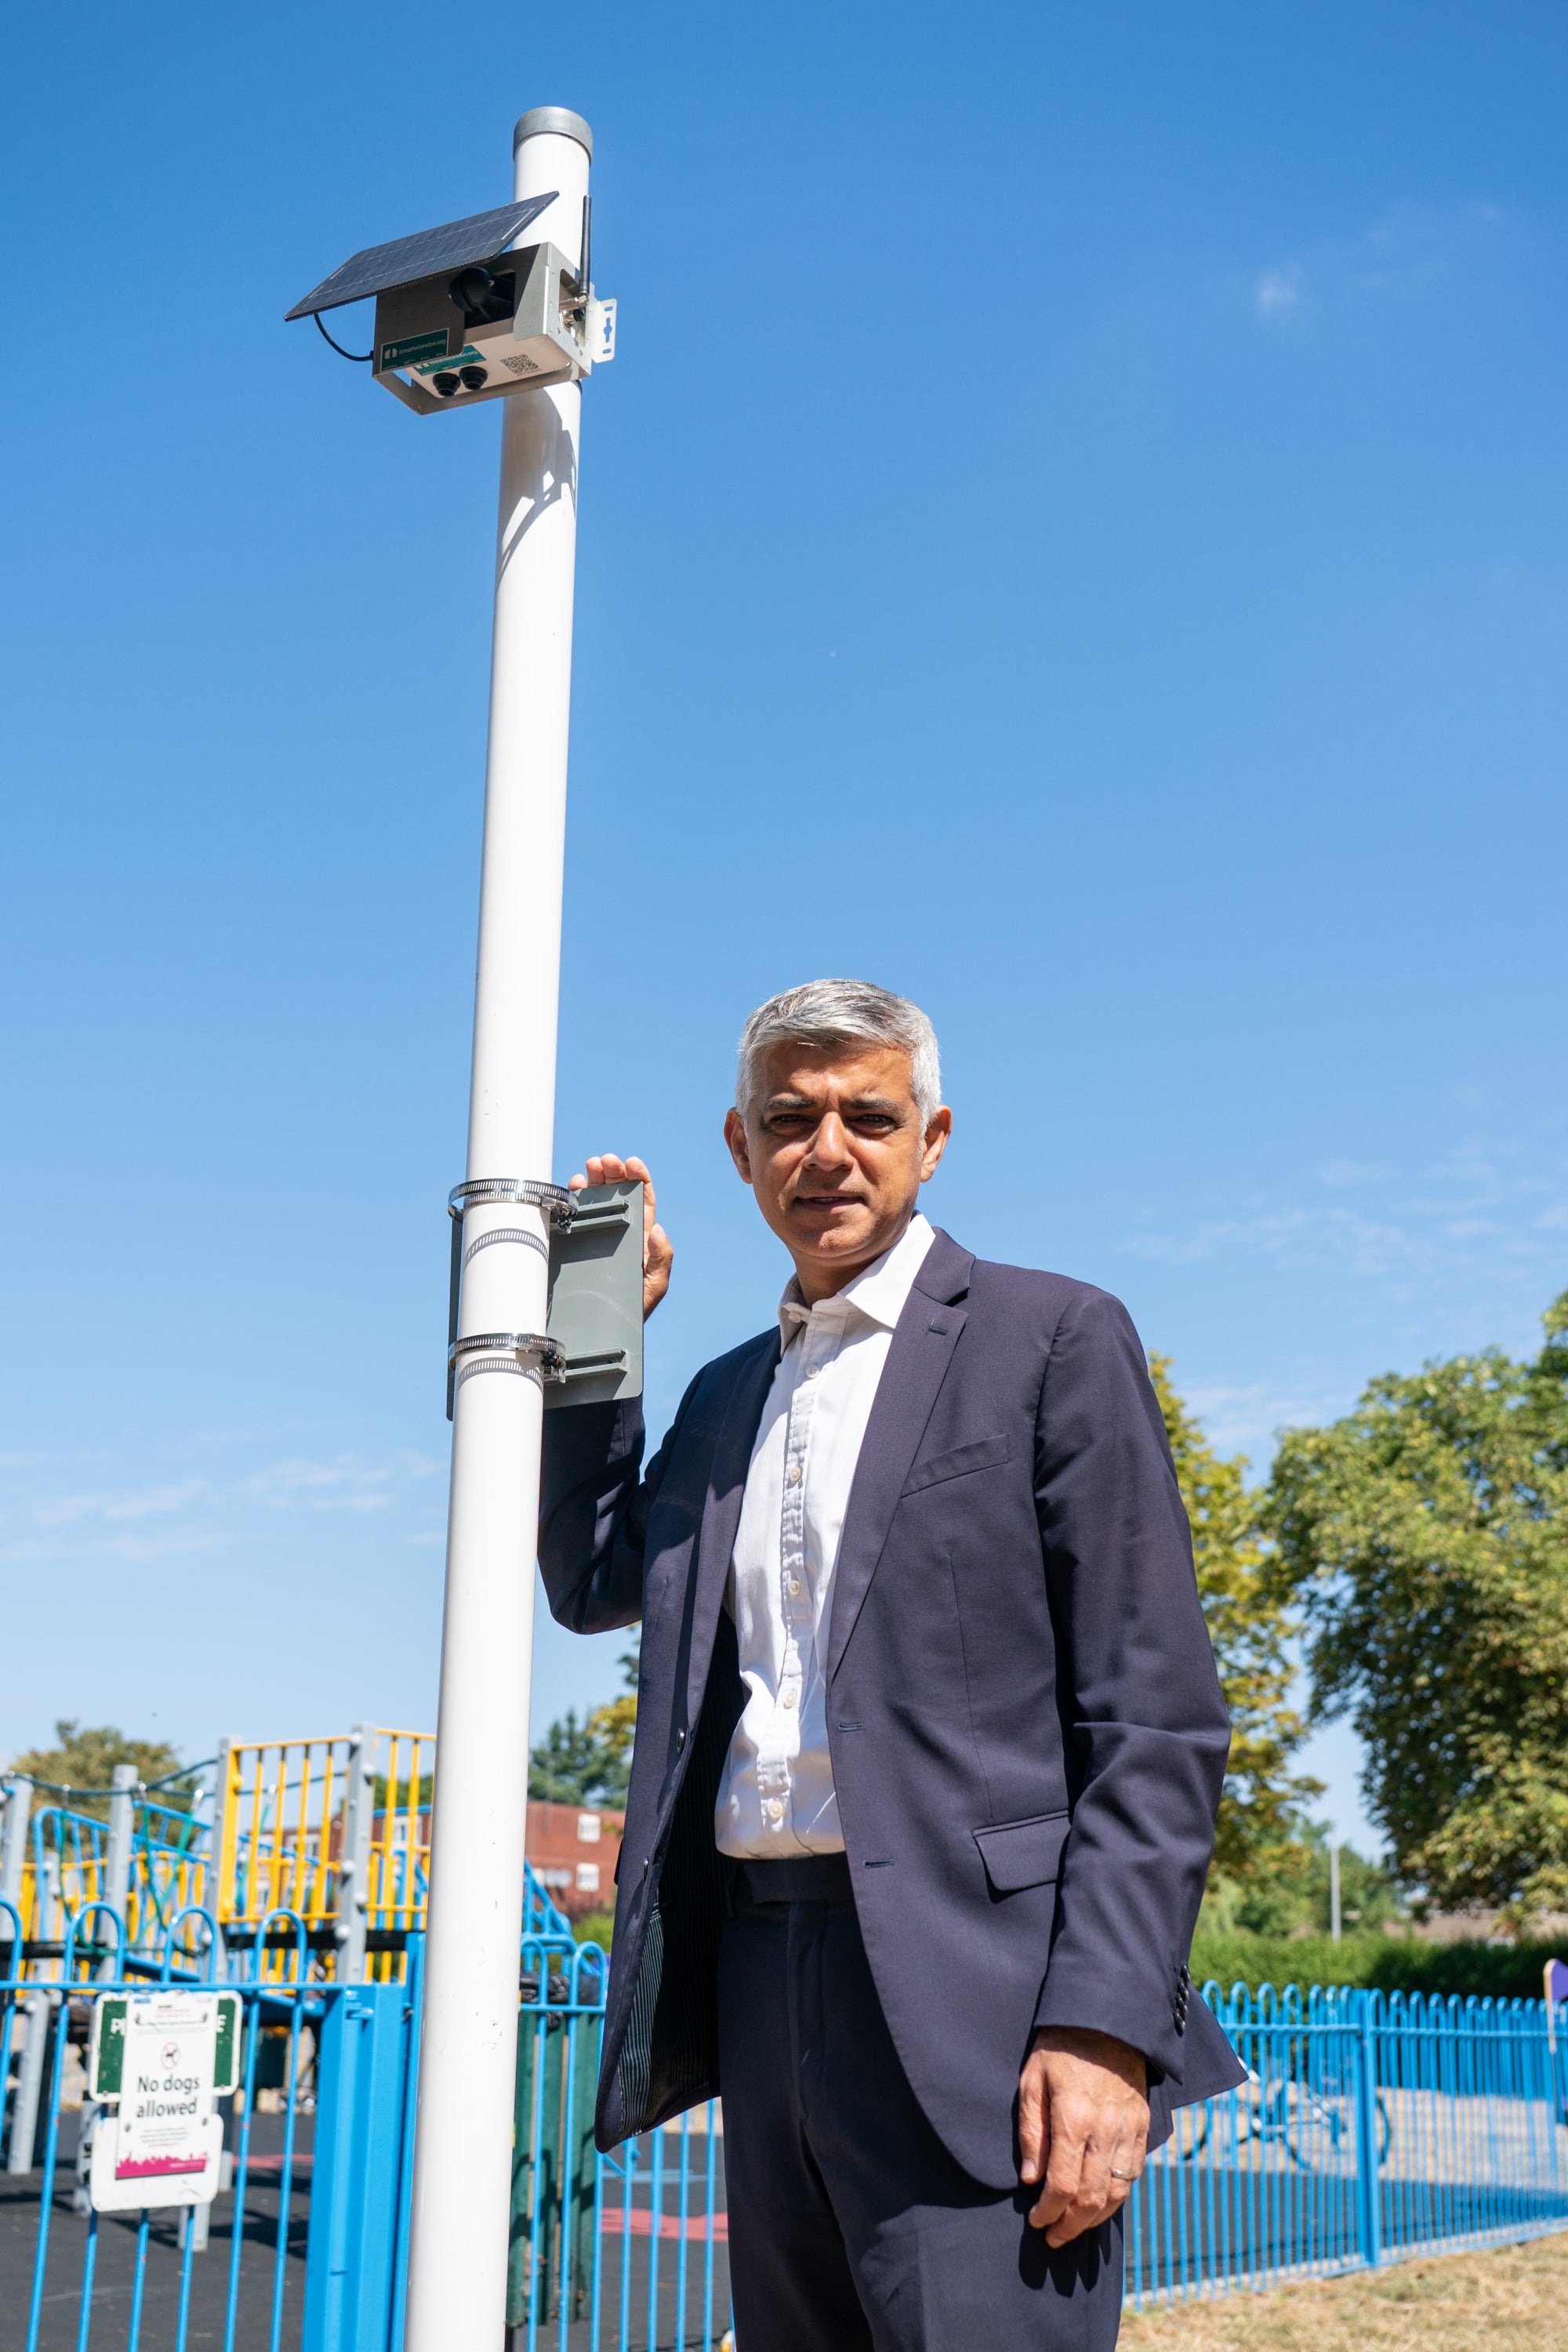 Sadiq Khan, pictured with a Ulez camera, says the policy is ‘the right one’ for London